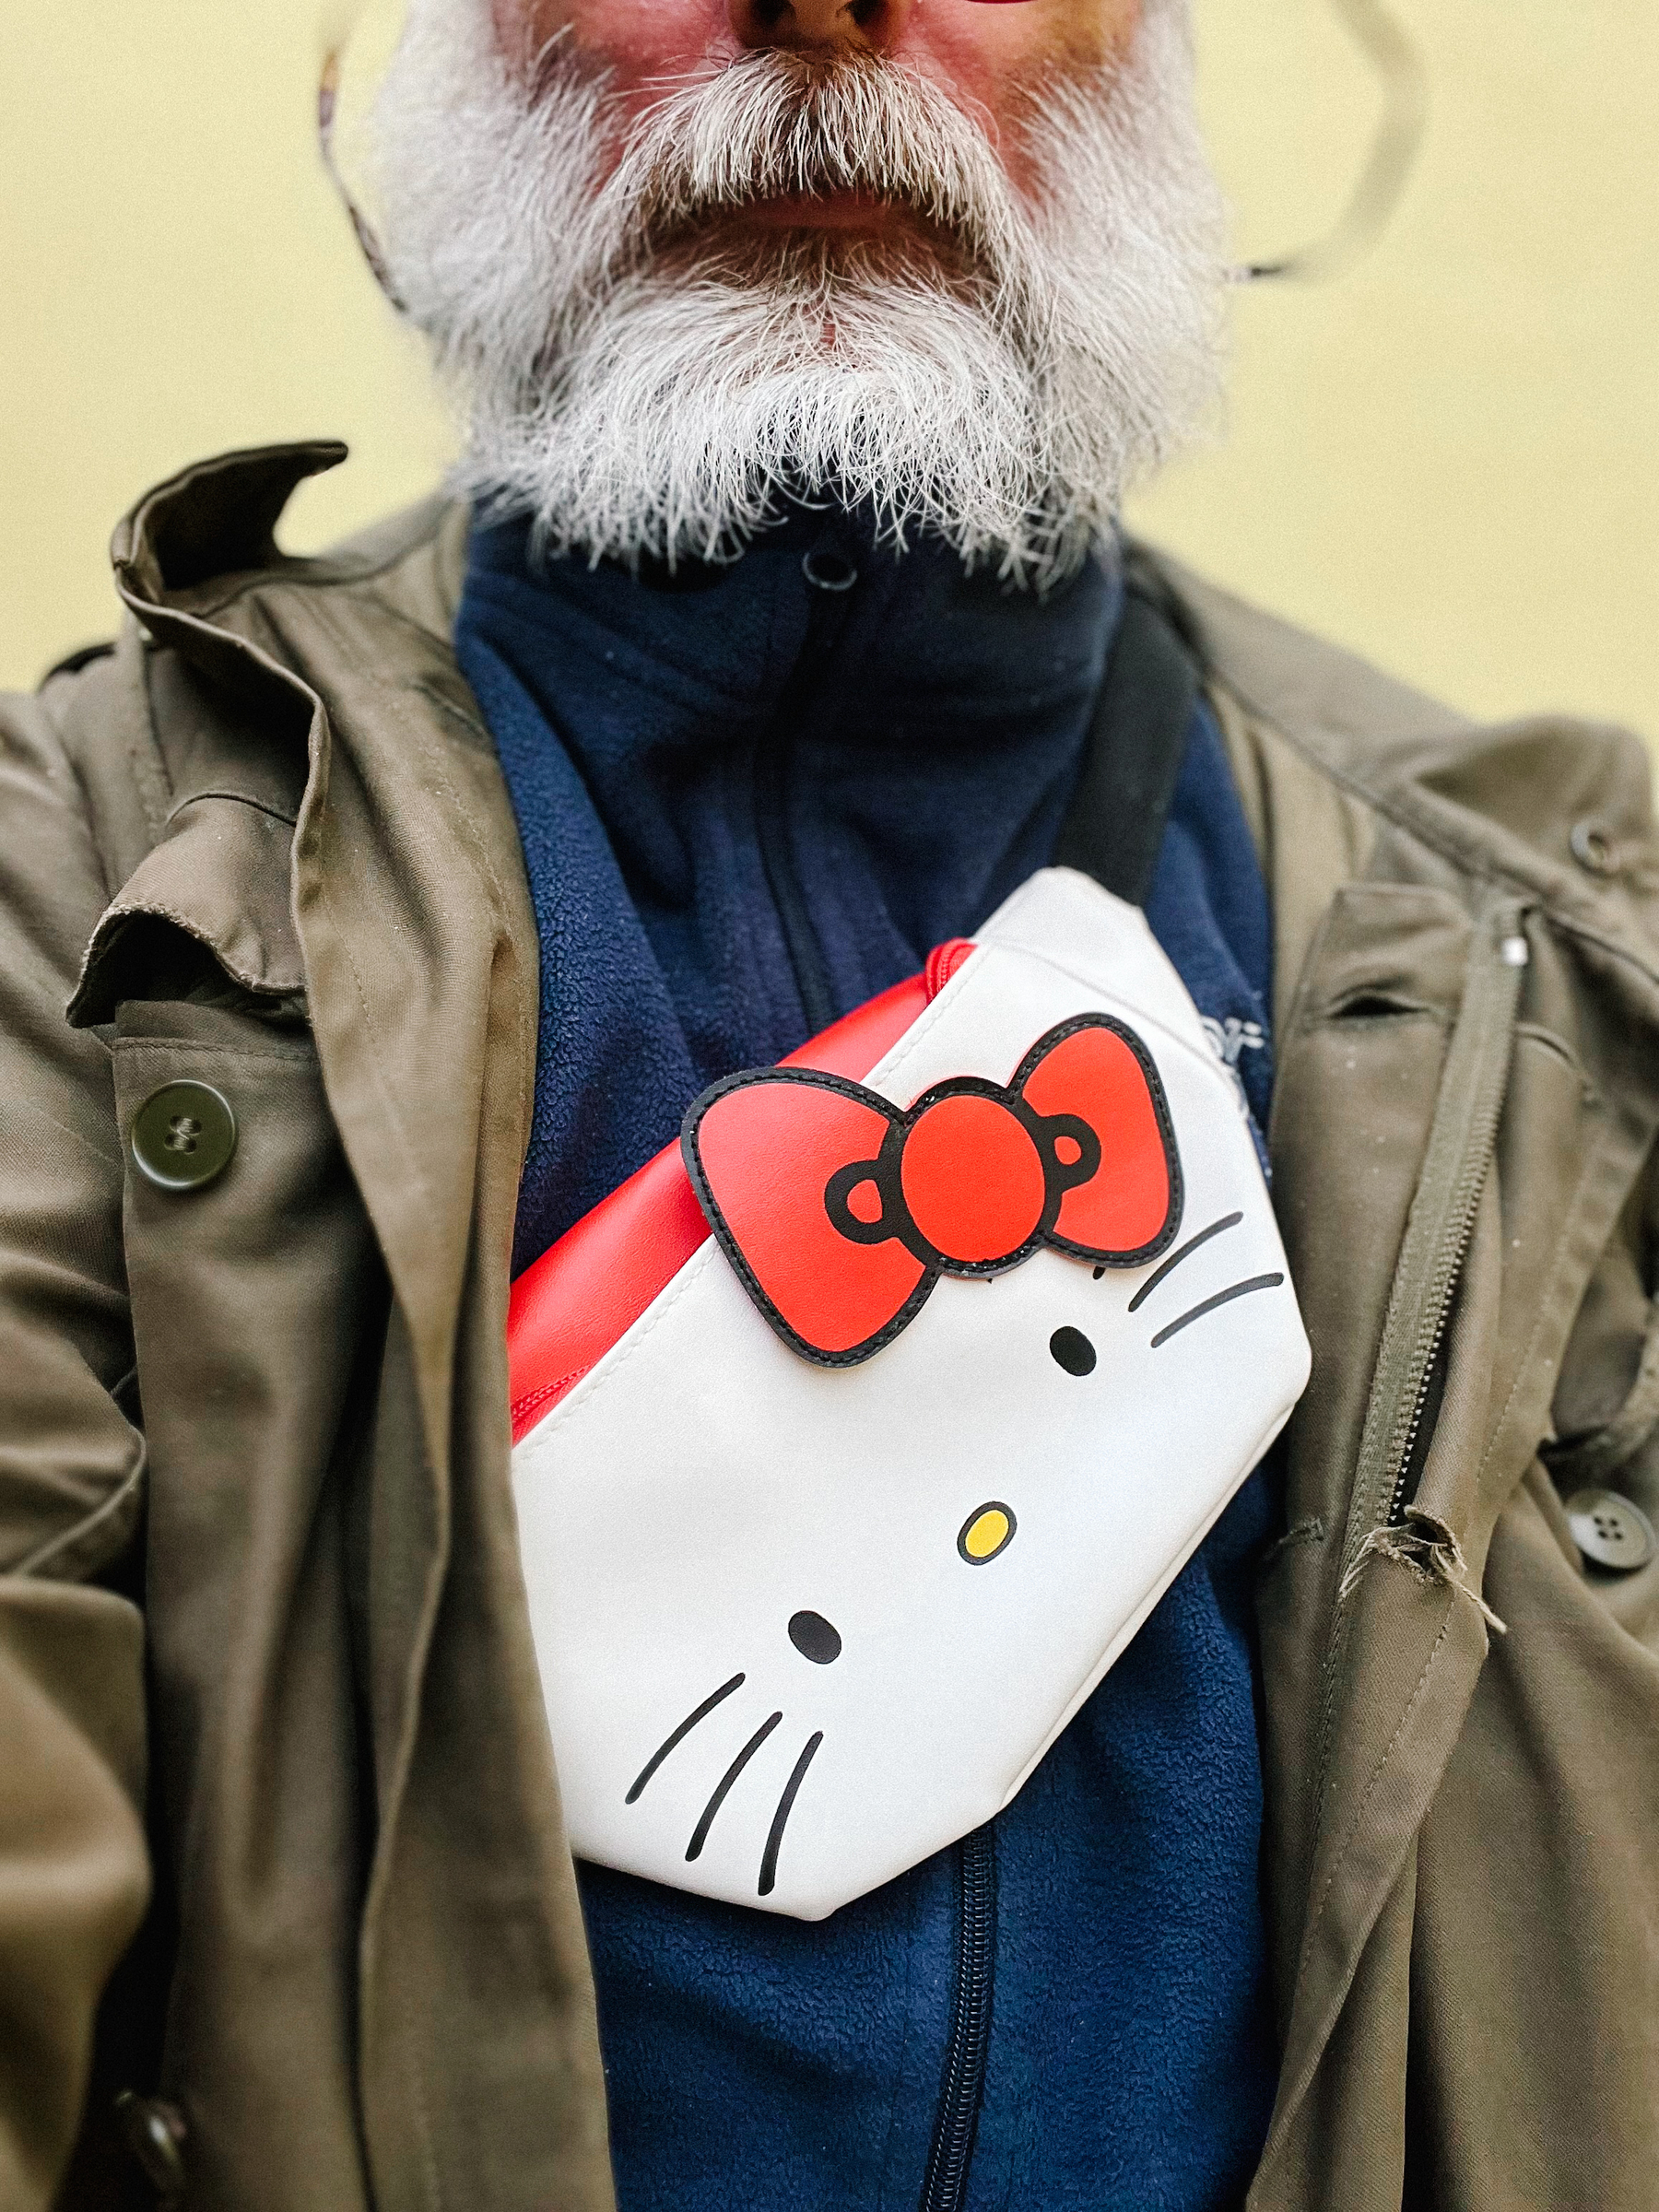 A person with a white beard wearing a bumbag with a Hello Kitty design, a blue fleece jacket, and an olive green jacket.